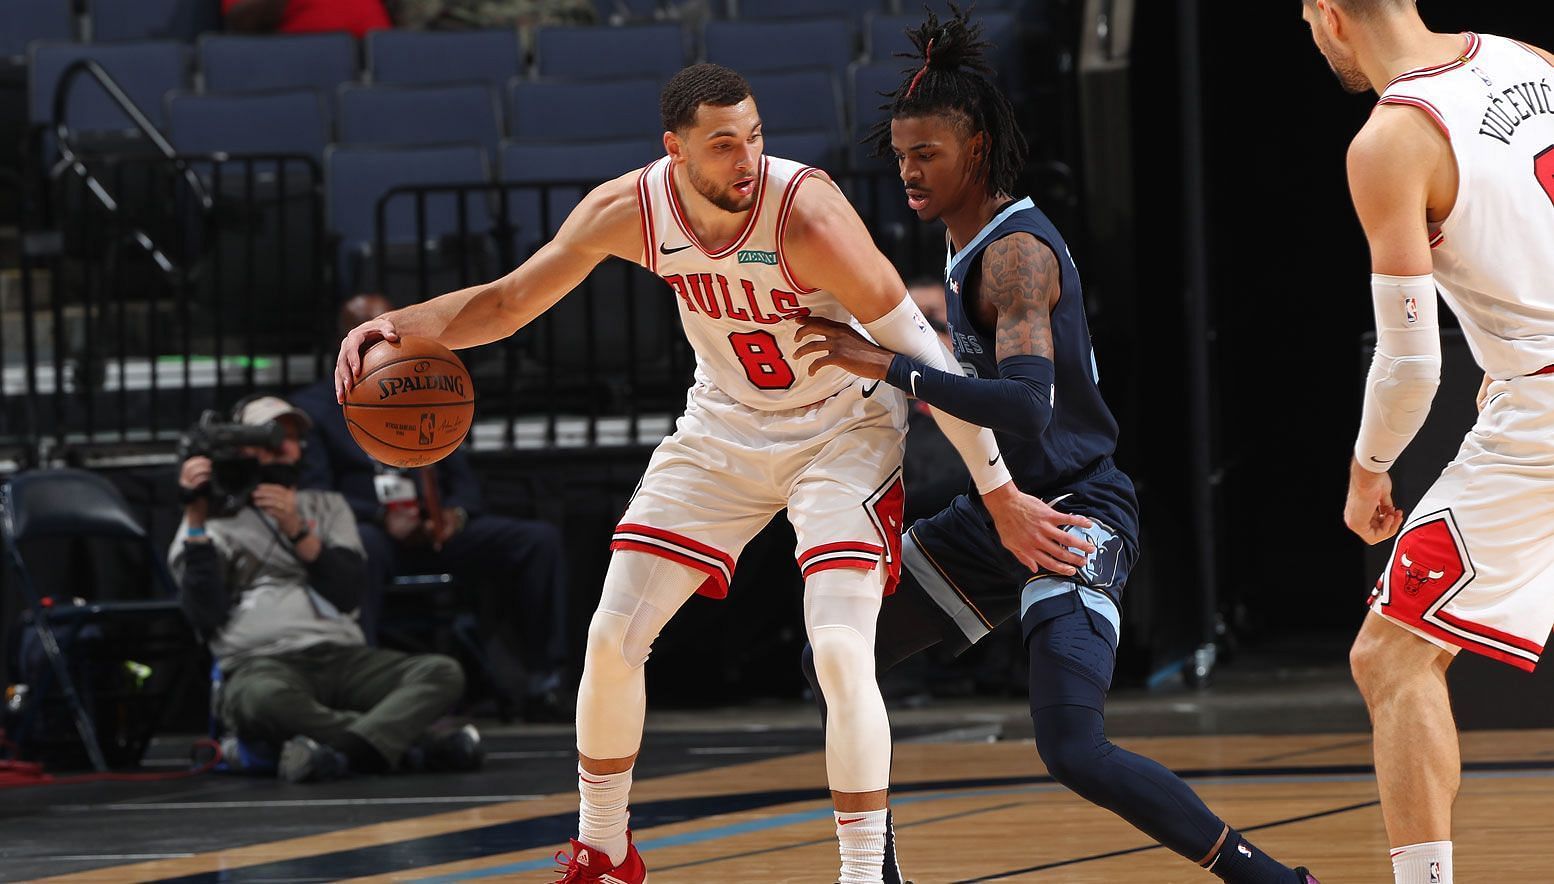 The visiting Memphis Grizzlies will have a rematch with the Chicago Bulls on Saturday. [Photo: NBA.com]